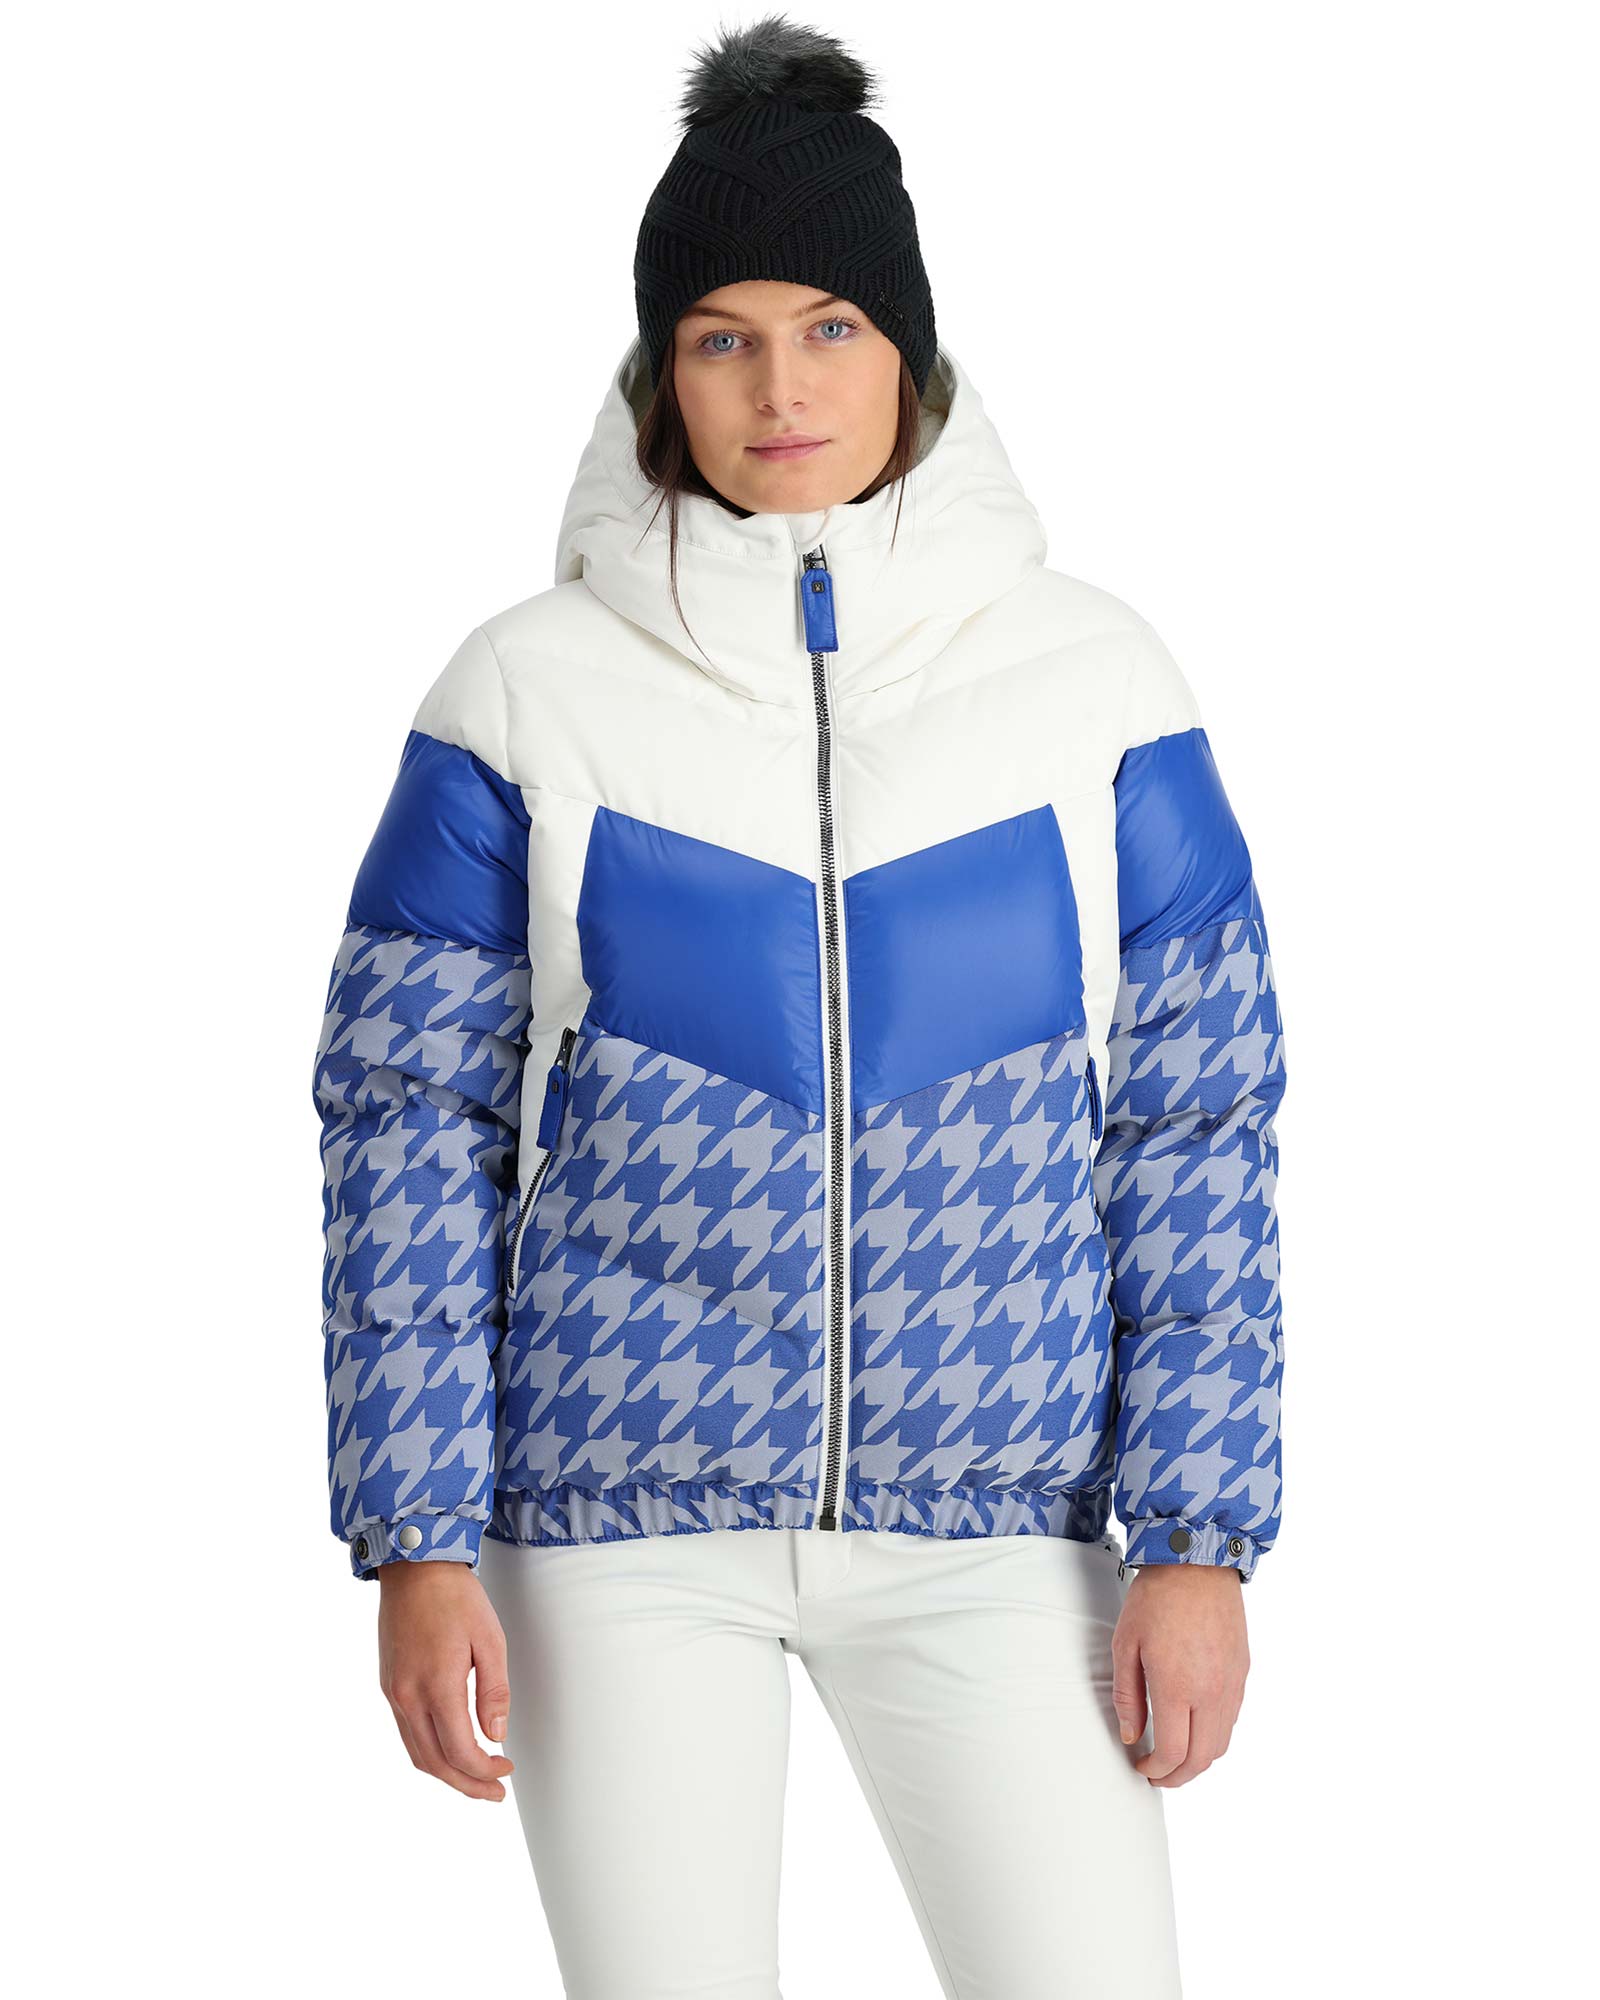 Spyder Women’s Eastwood Down Jacket - Electric Blue Houndstooth Print M